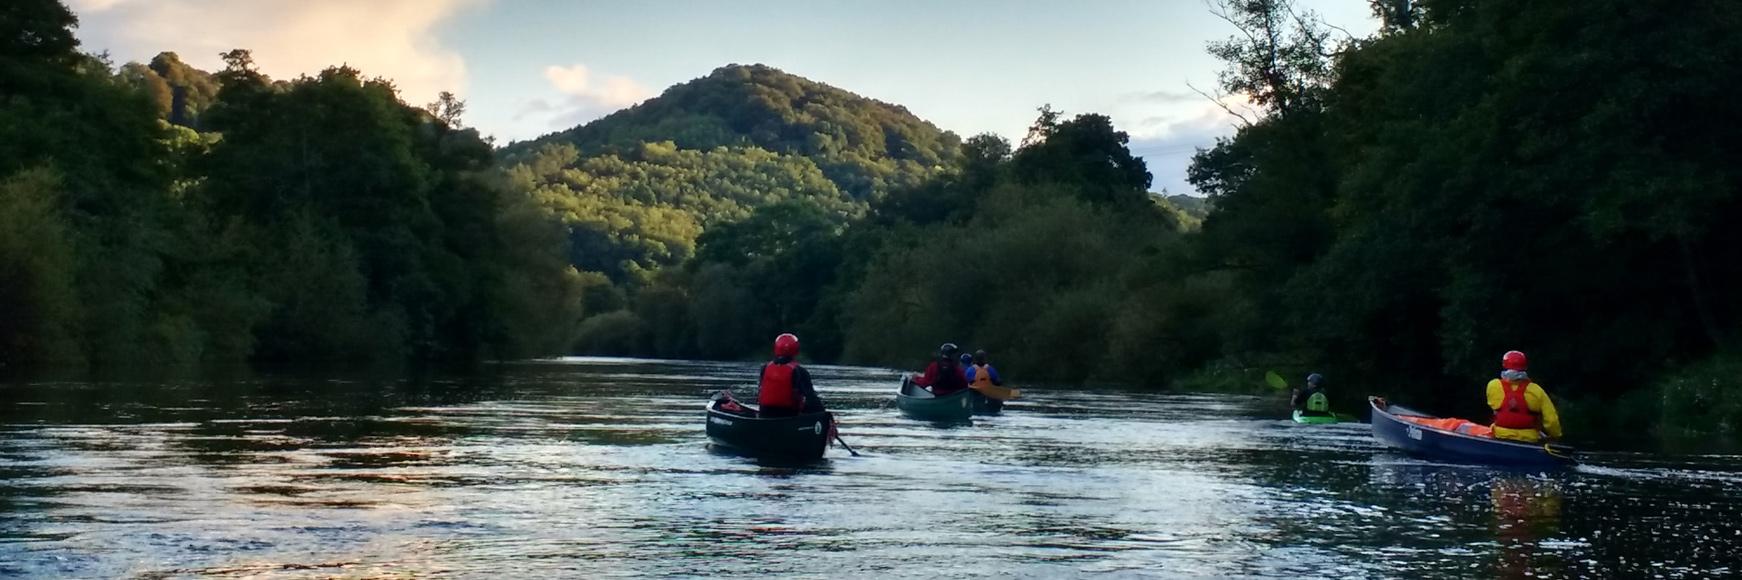 Canoeing on the Wye banner image